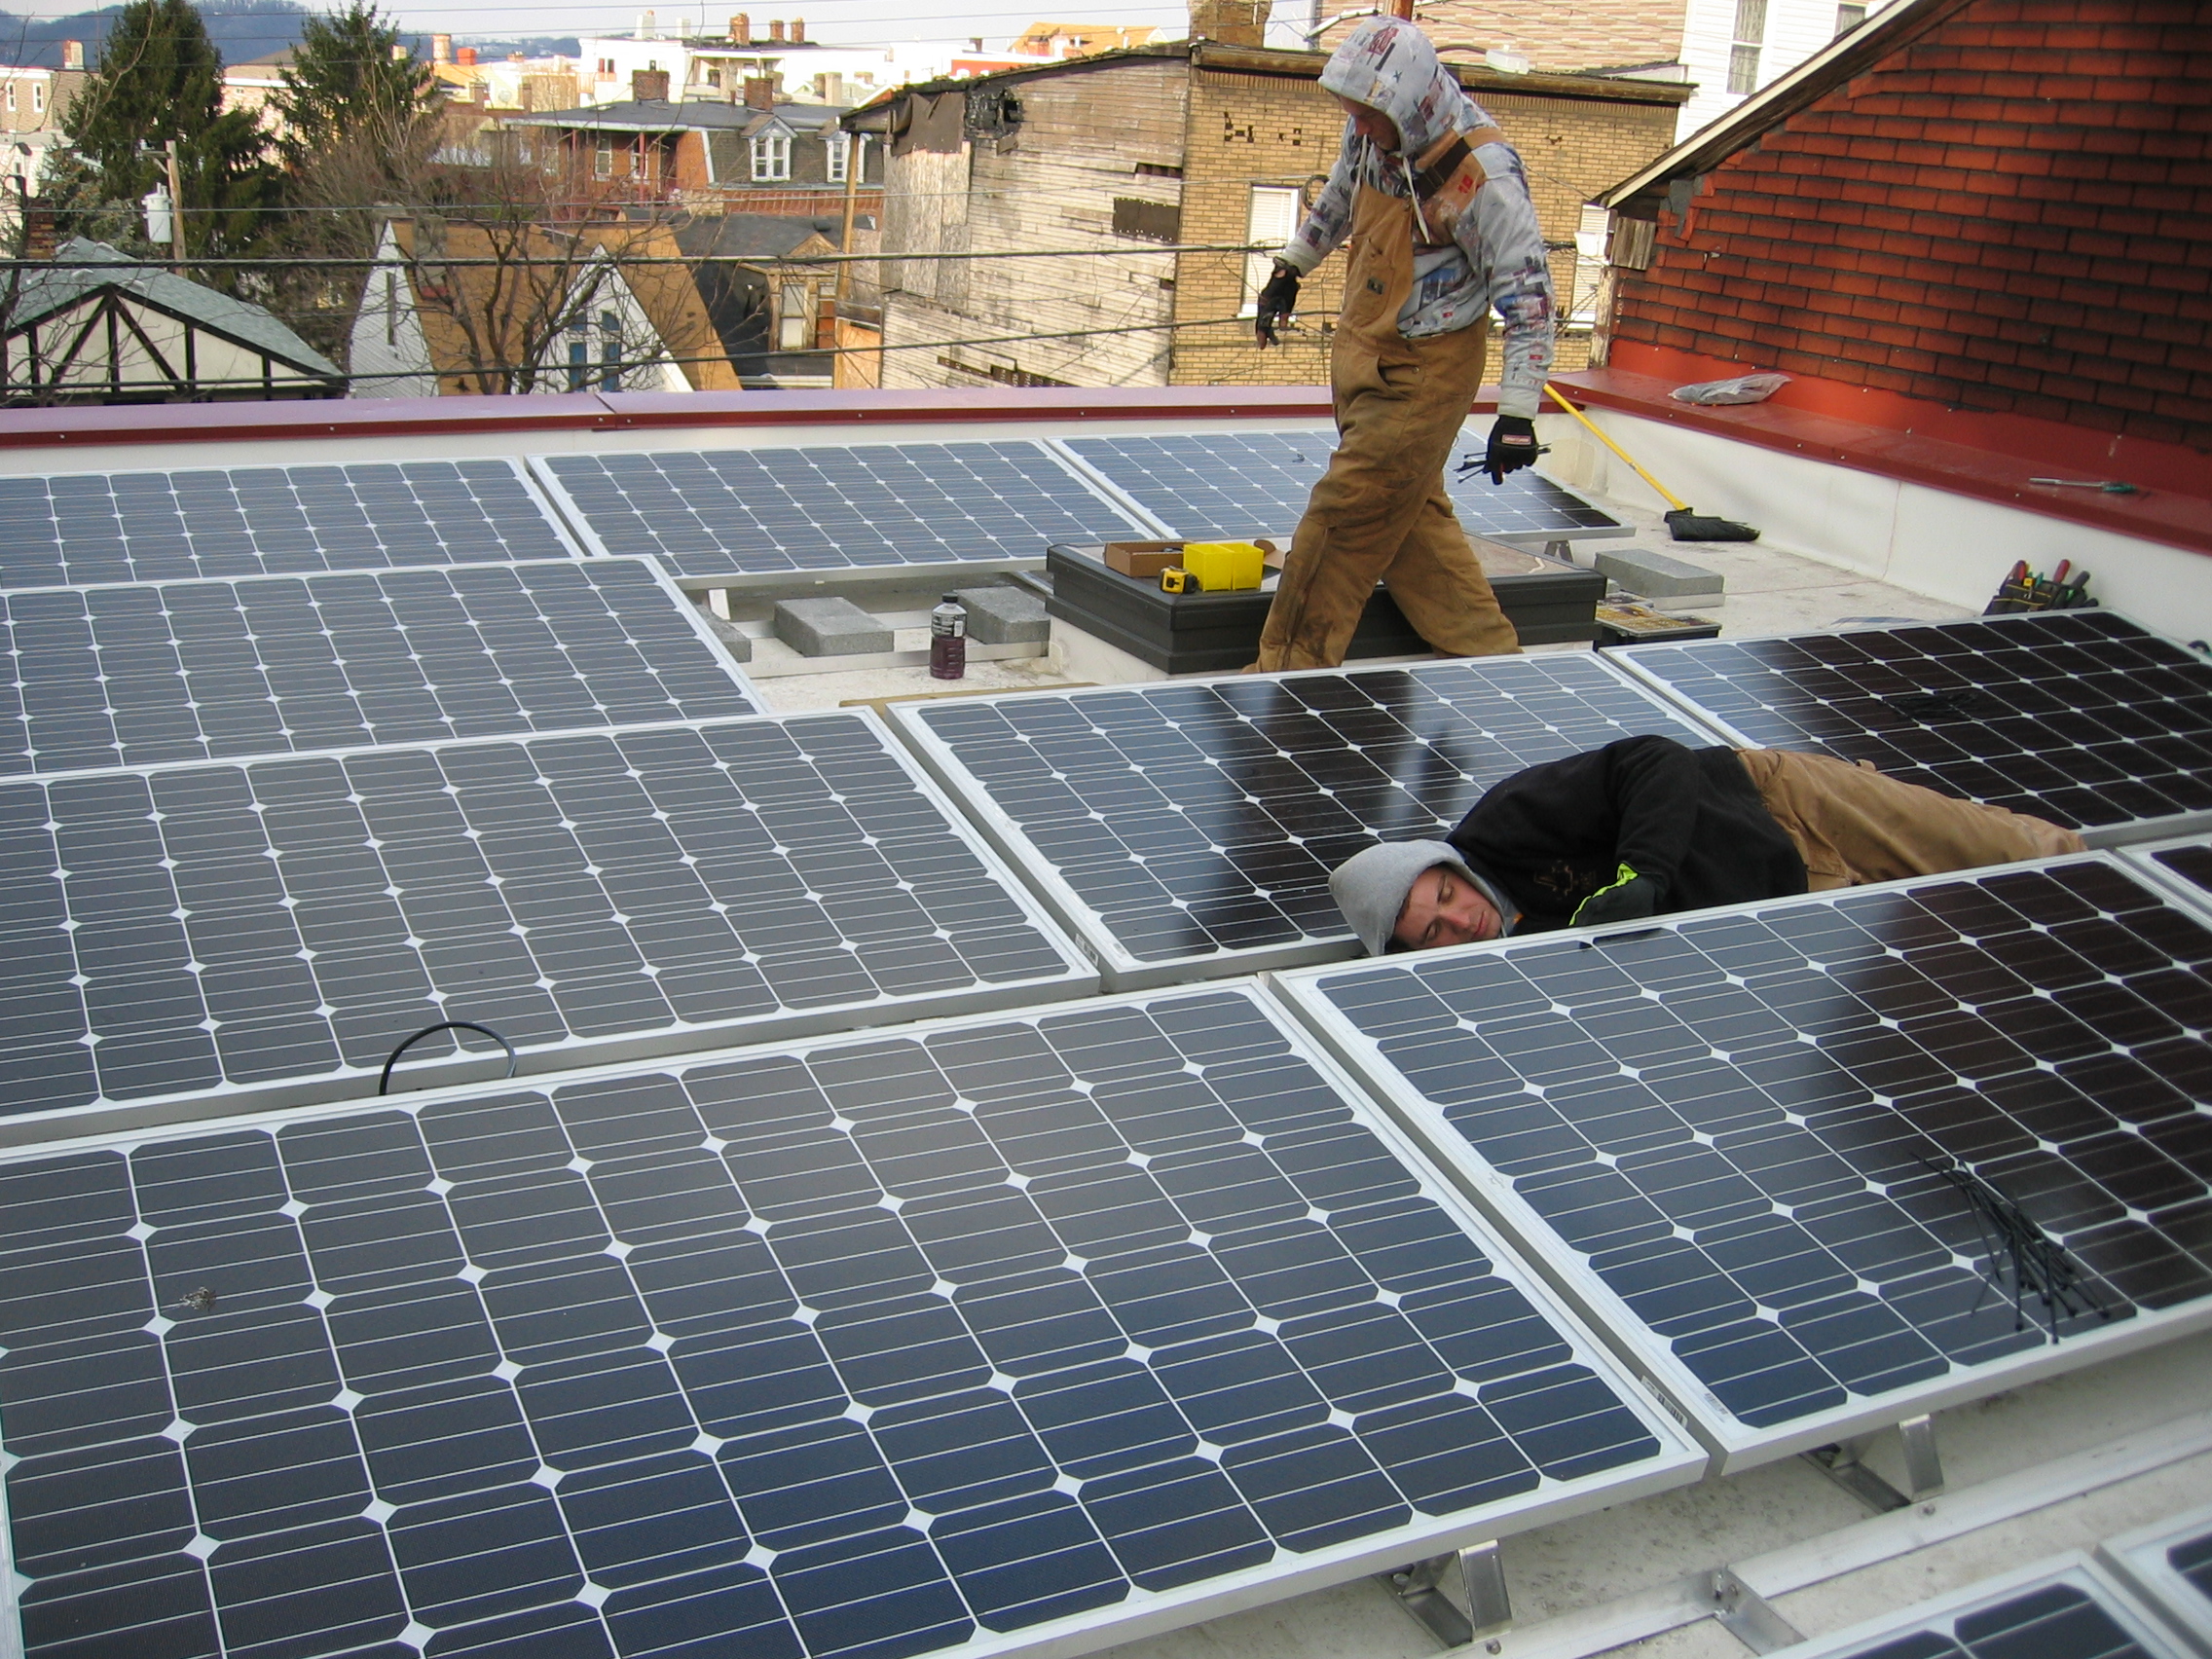 TAI+LEE Architects, New office, 3106 Brereton St, 2008. 3KWp photovoltaic array.